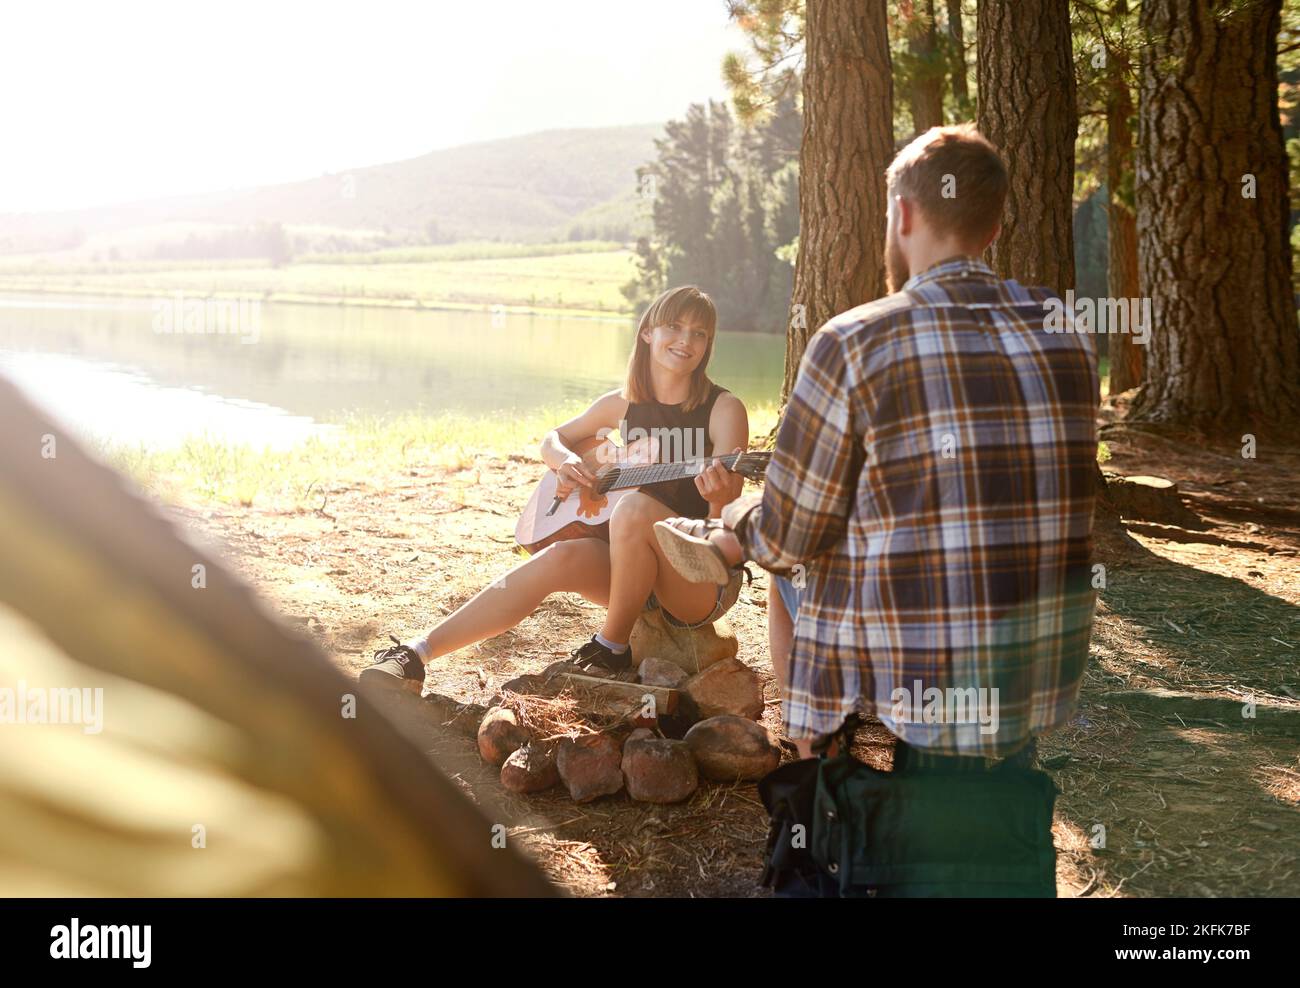 Music to my ears in the outdoors. a young woman playing guitar for her boyfriend at their campsite. Stock Photo